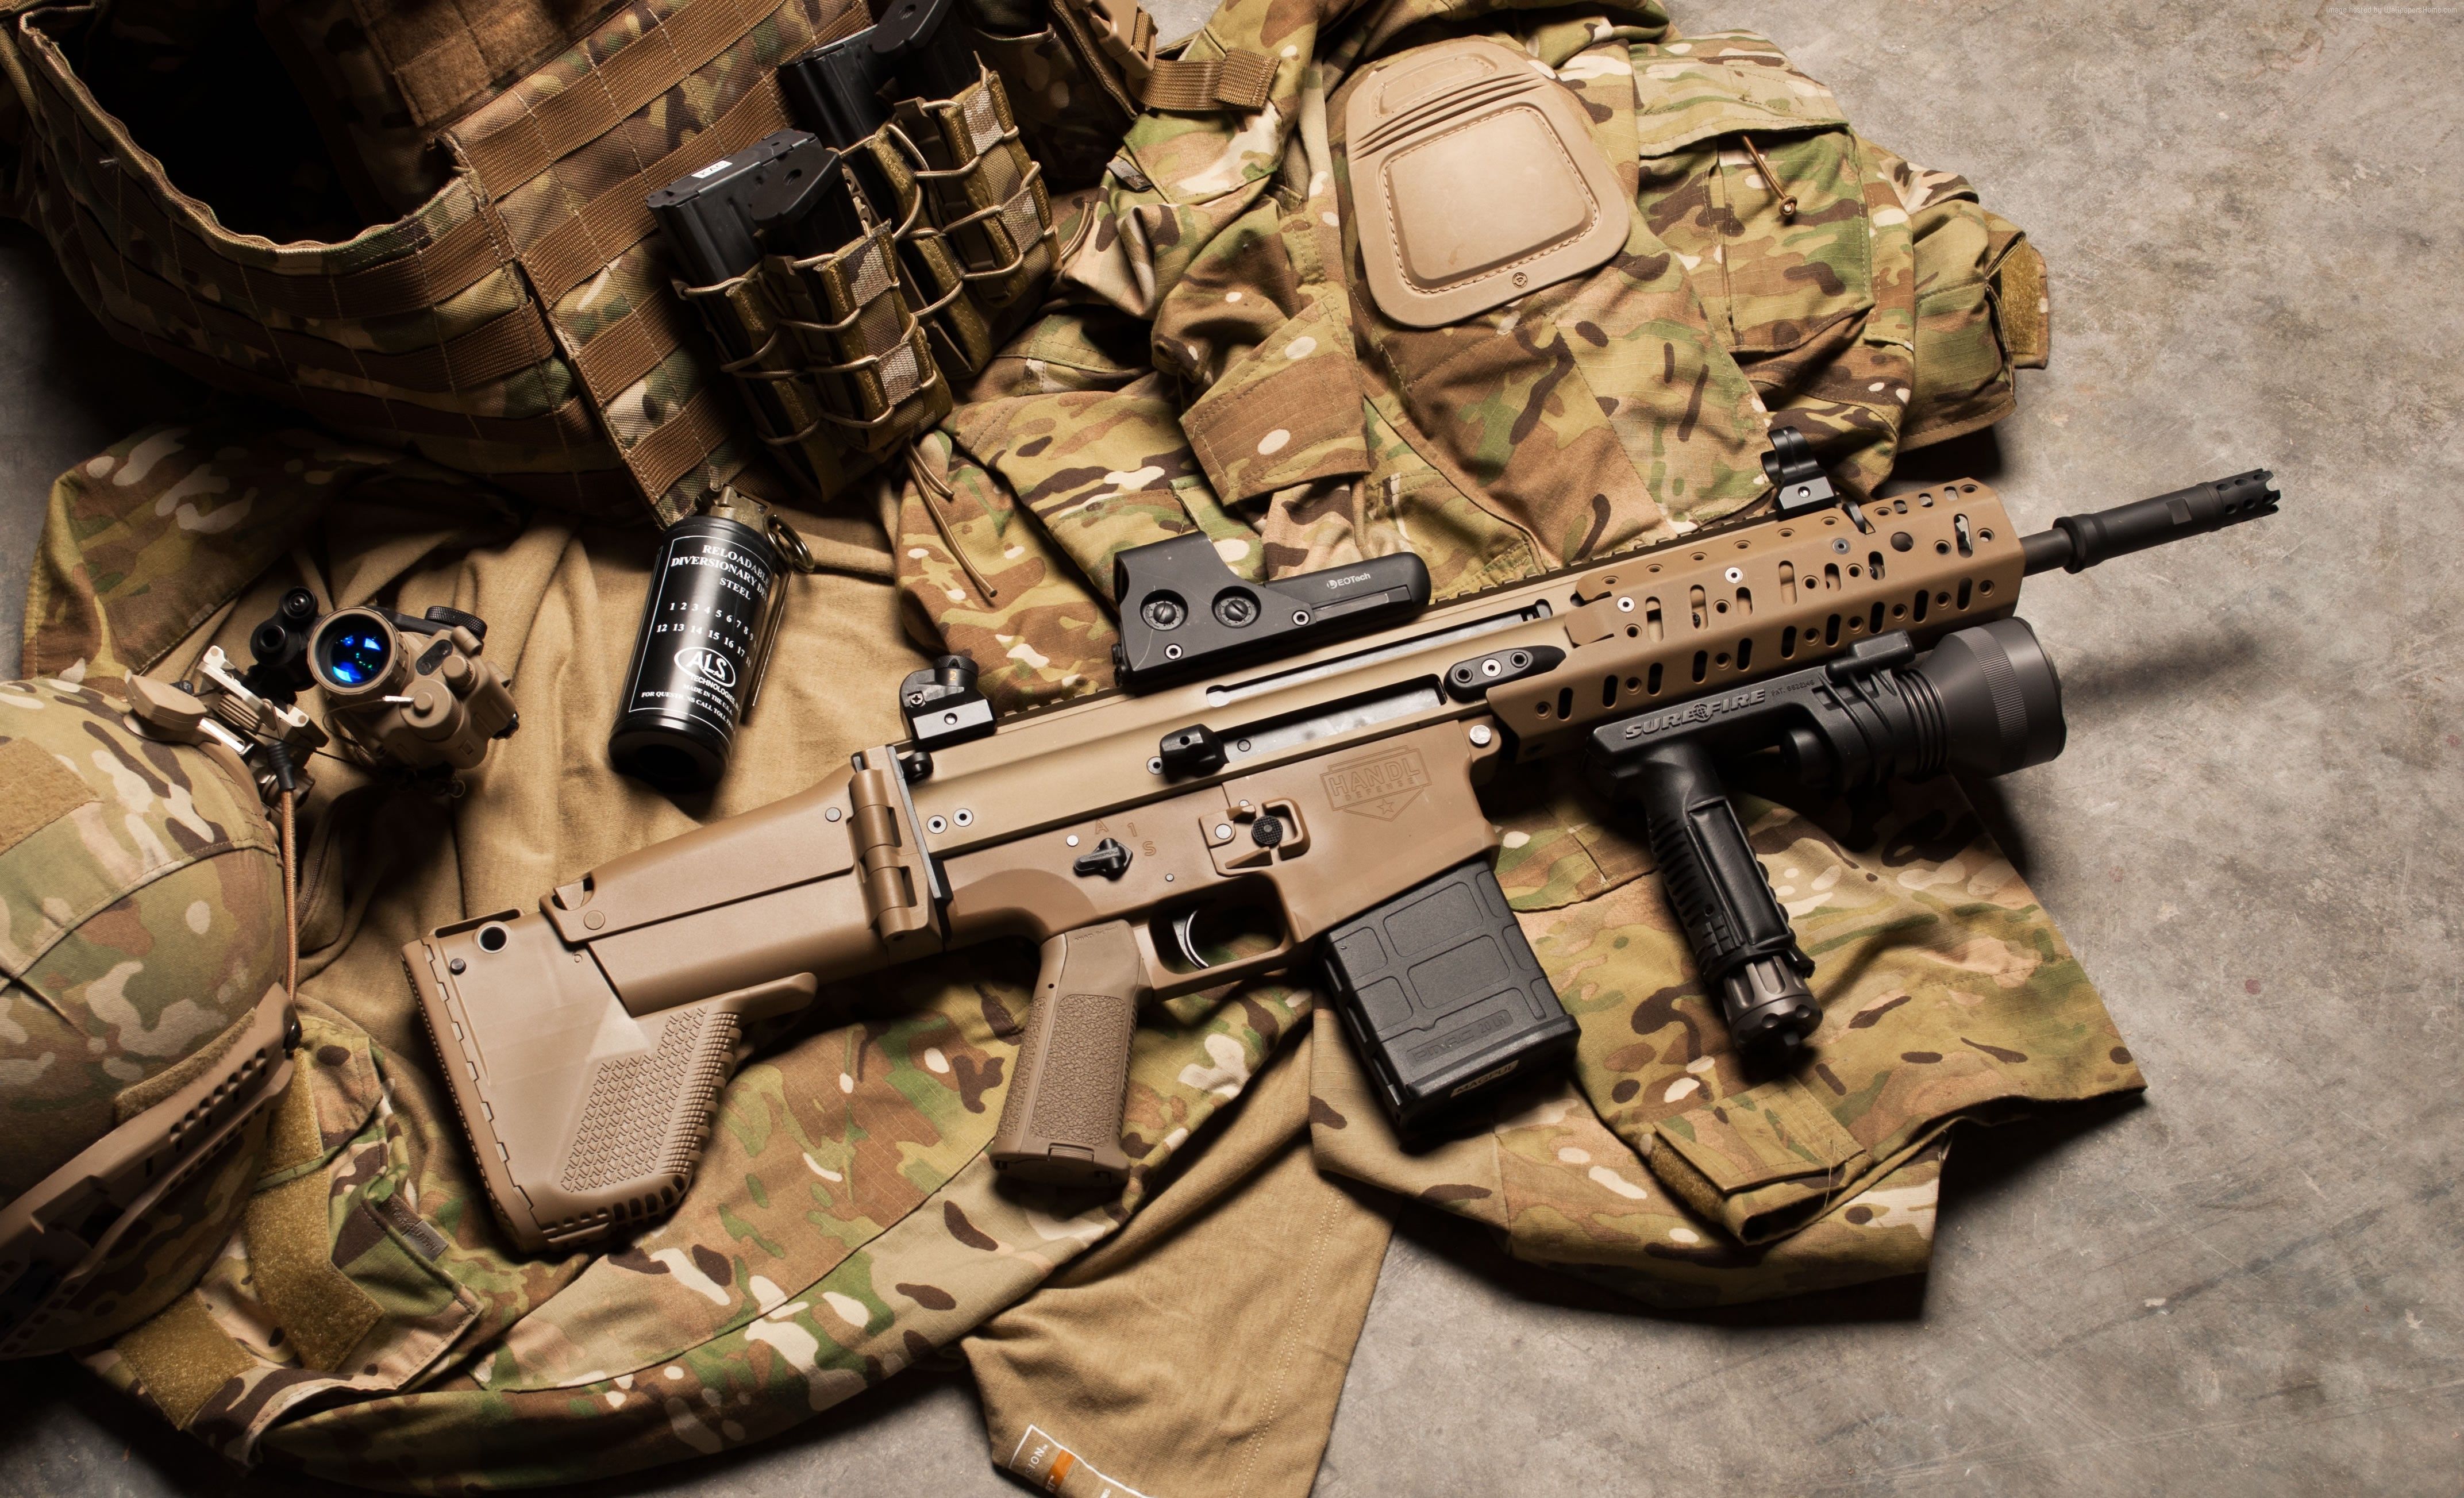 Fn Scar L Rifle Wallpaper, Weapons, HQ Fn Scar L Rifle Picture